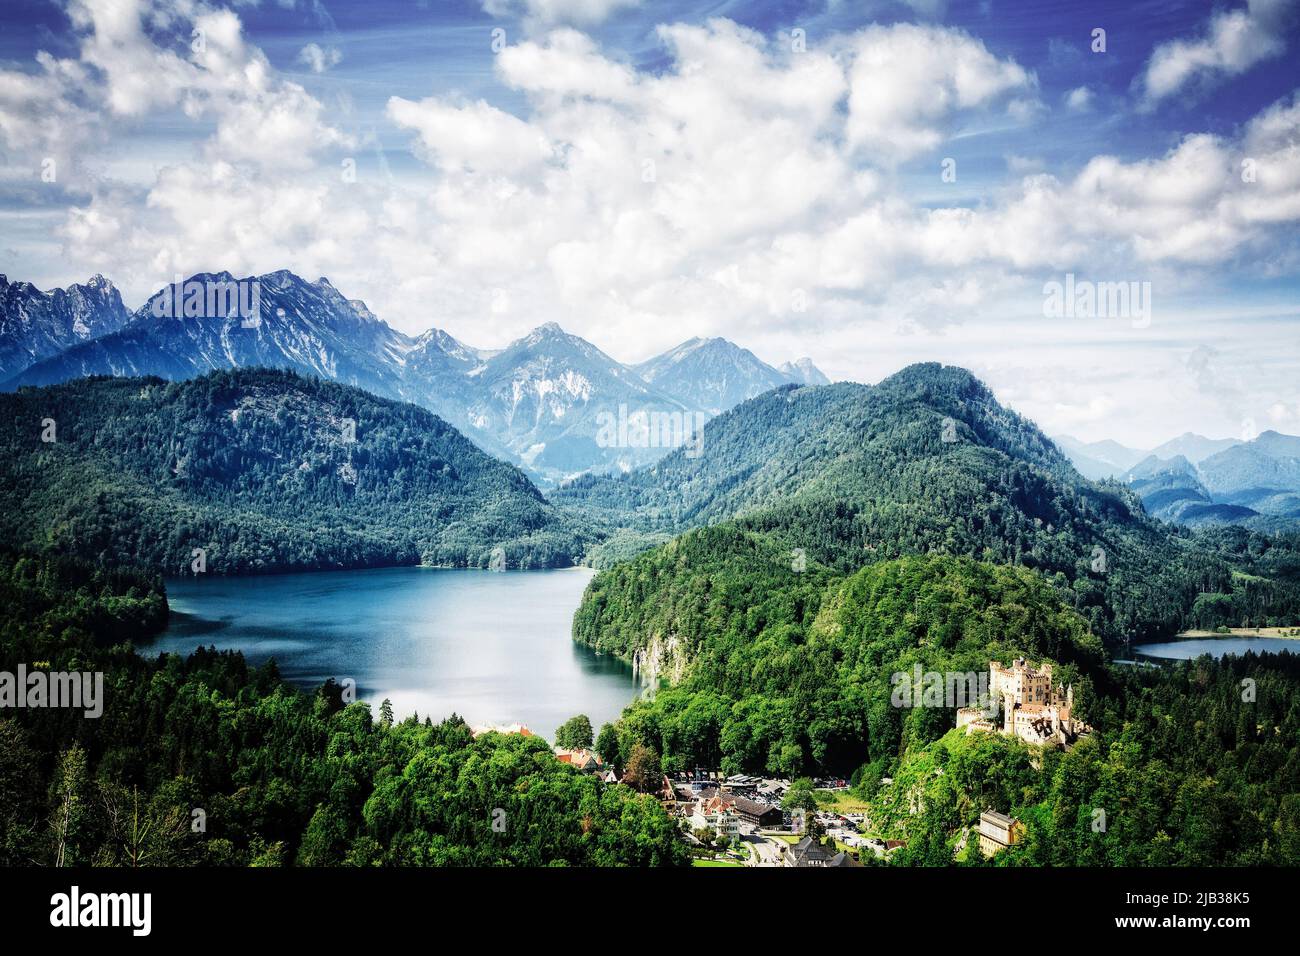 Hohenschwangau Castle stands at the foot of the Bavarian Alps overlooking the Alpsee bei Schwangau in southern Germany. Stock Photo